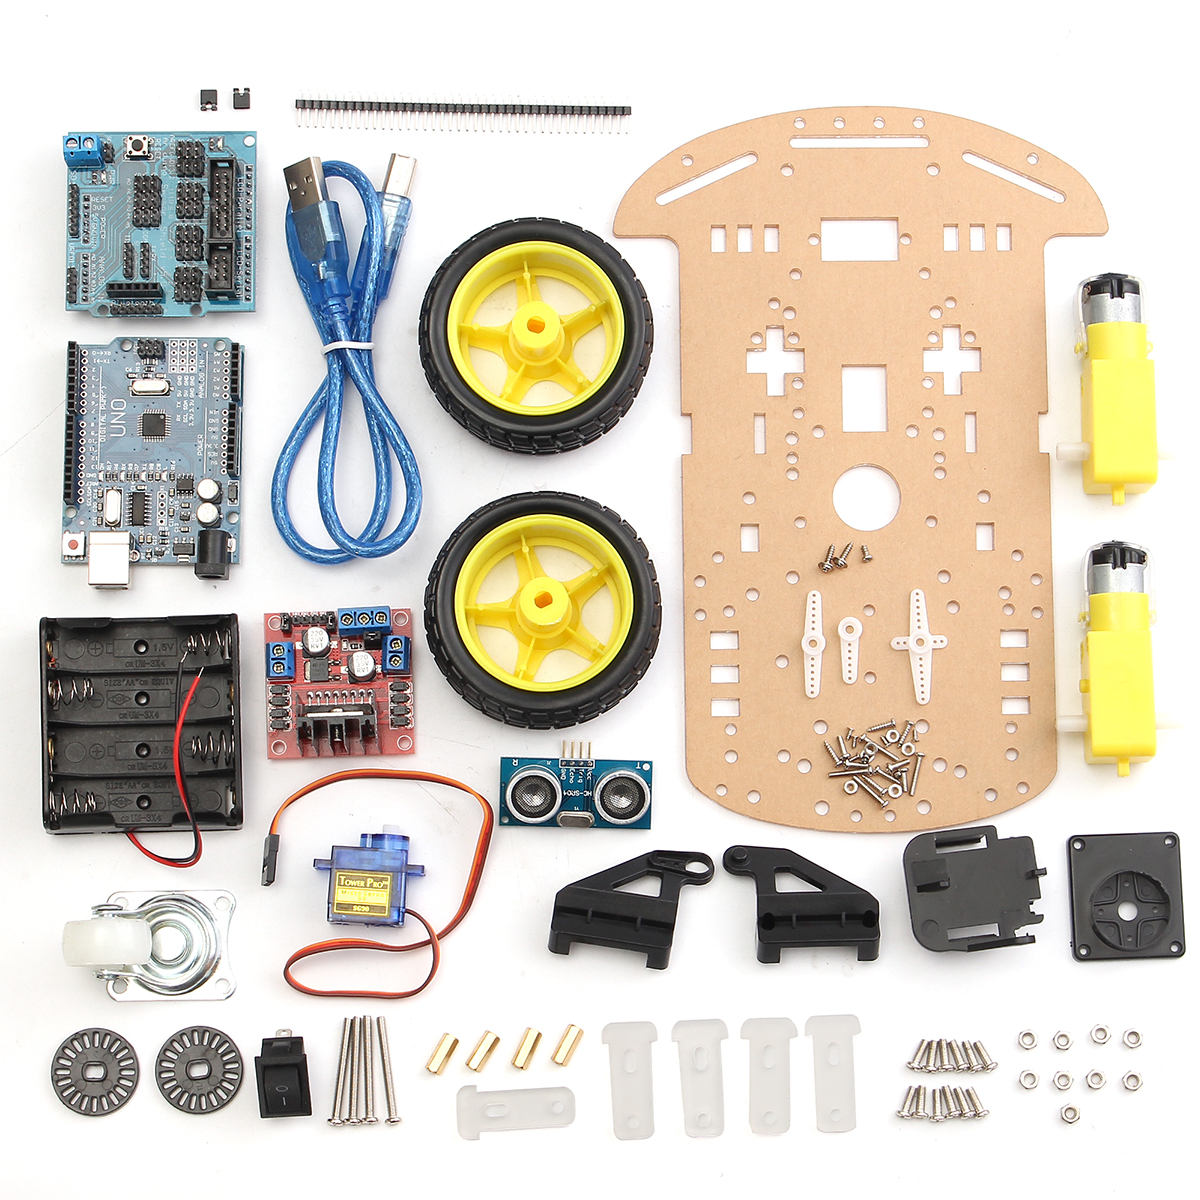 

2 Wheels Ultrasonic Smart Robot Car Chassis Tracking Car Kit For Arduino